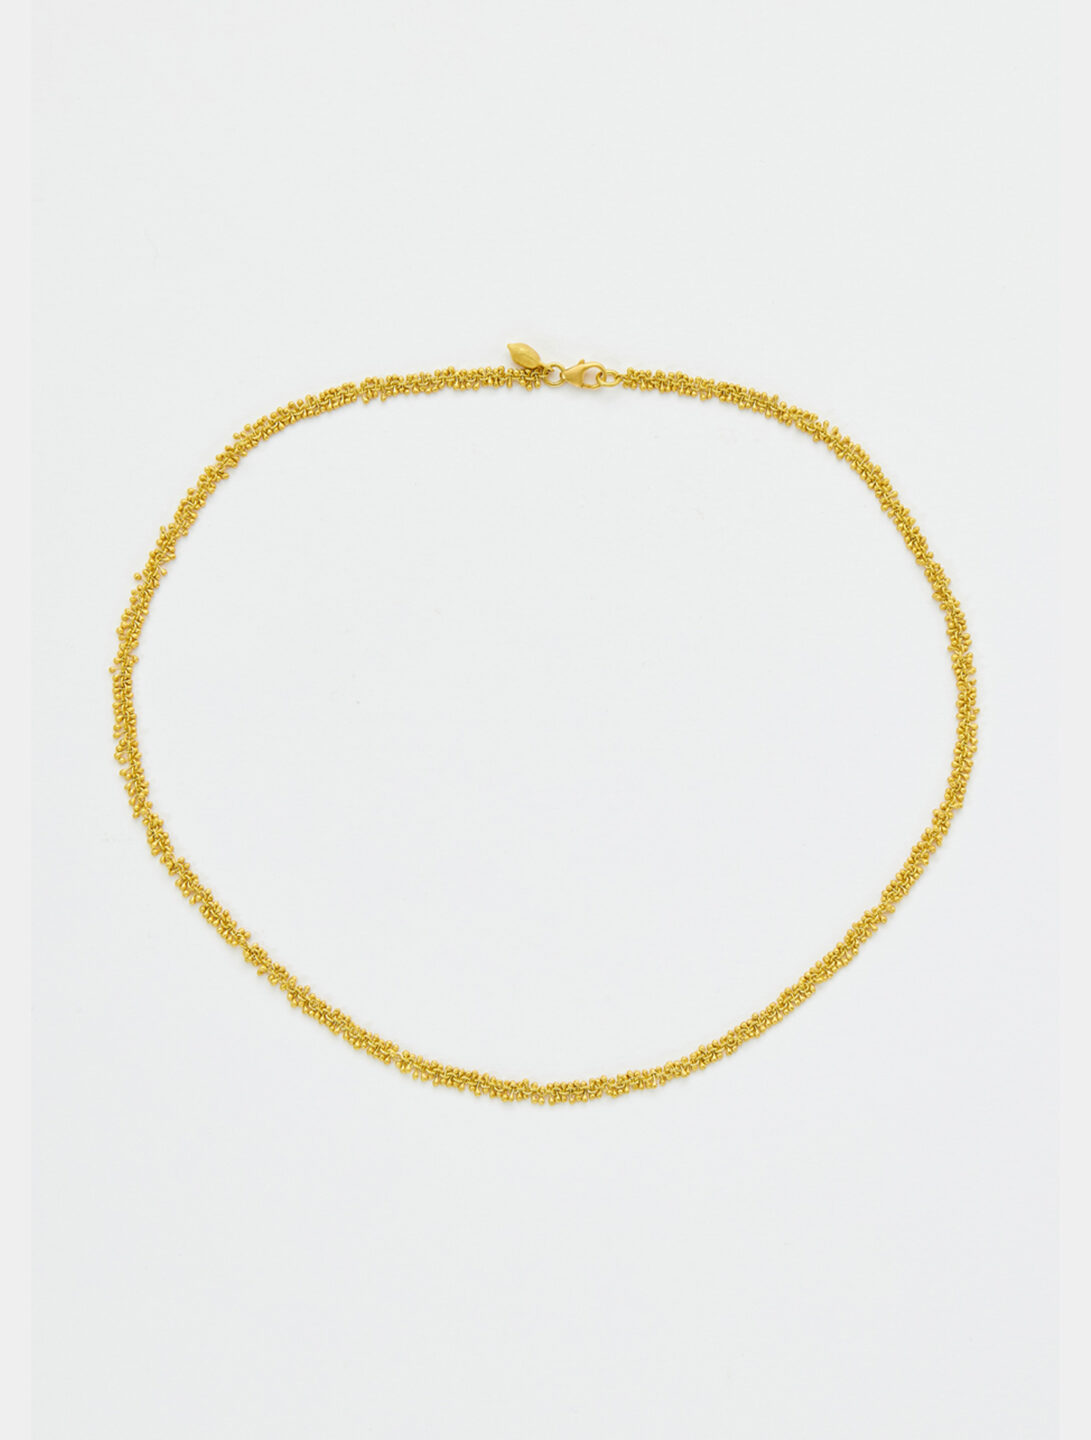 Pippa-Small-Jewellery-18kt-Gold-Theia-Bobble-Detailed-Chain-Necklace-product-image